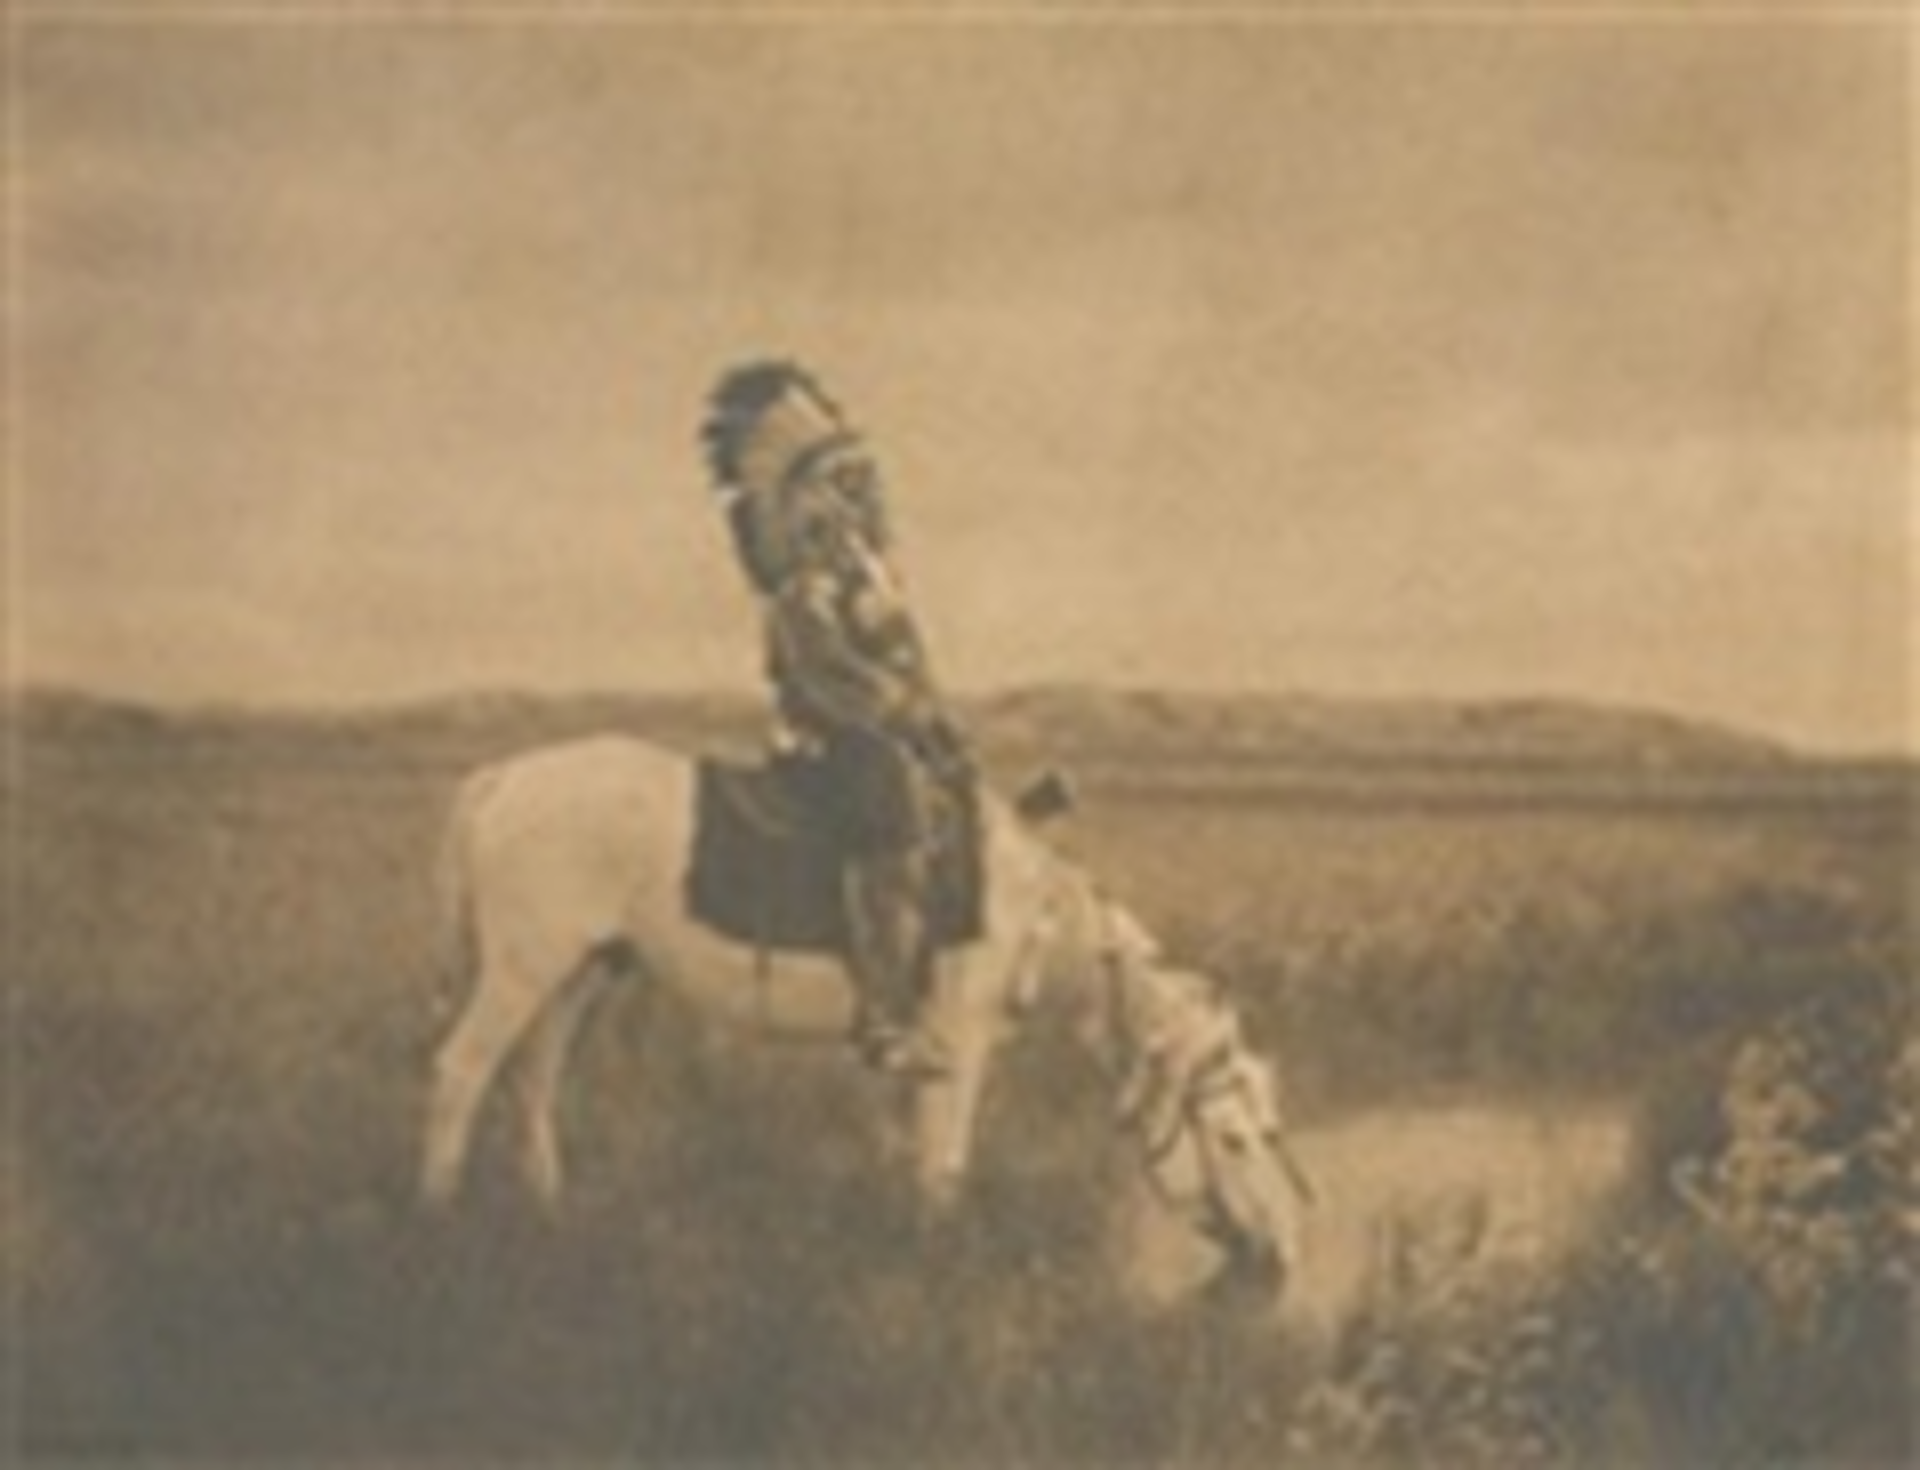 An oasis in the Badlands, 1905 by Edward S Curtis